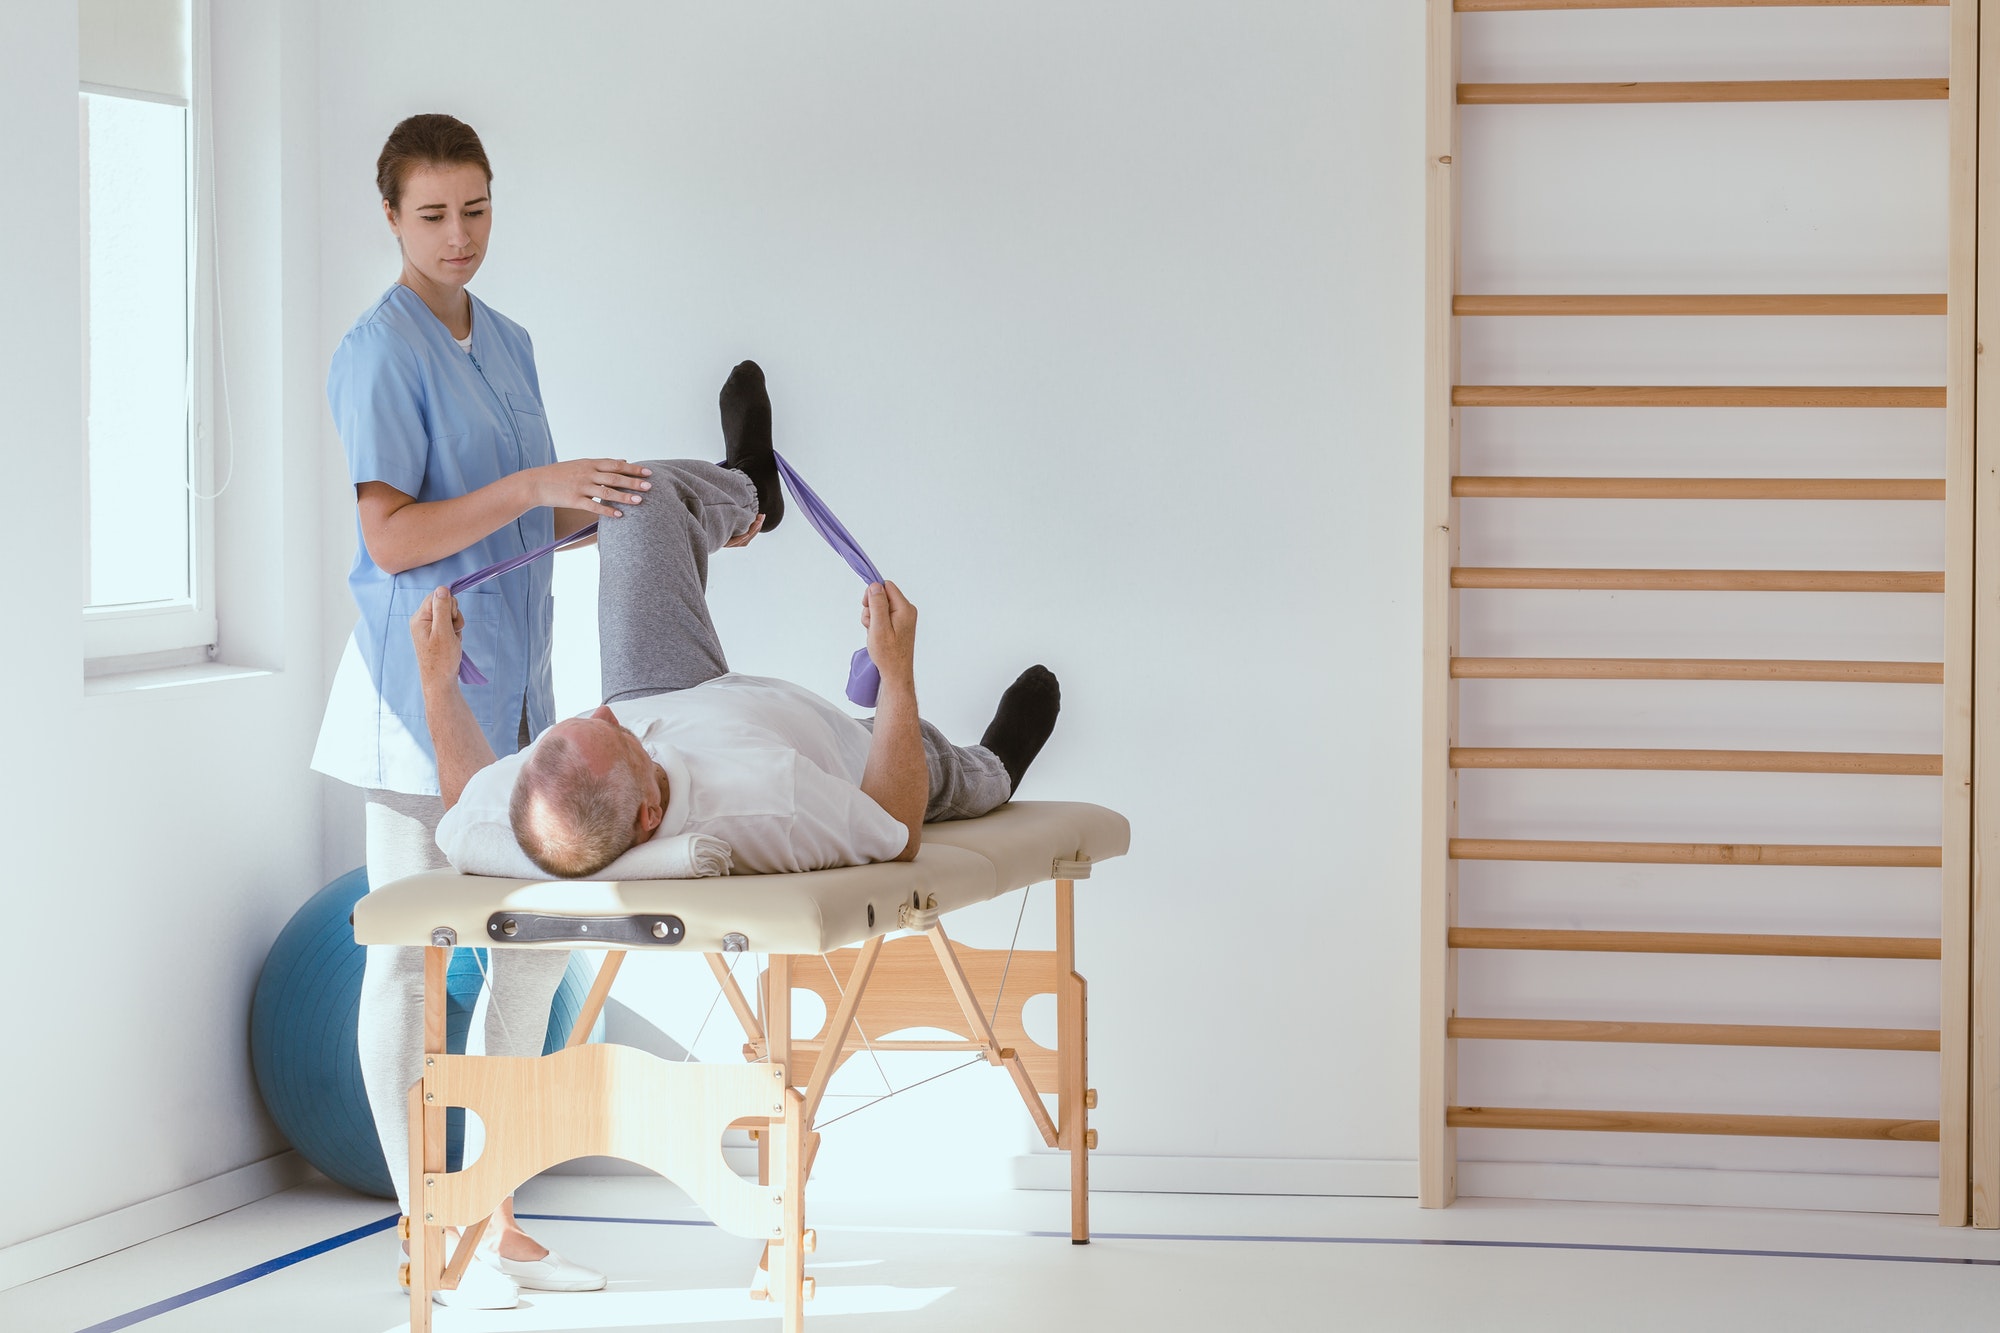 Injured patient lying on a physiotherapy bed and performing exercises with tapes